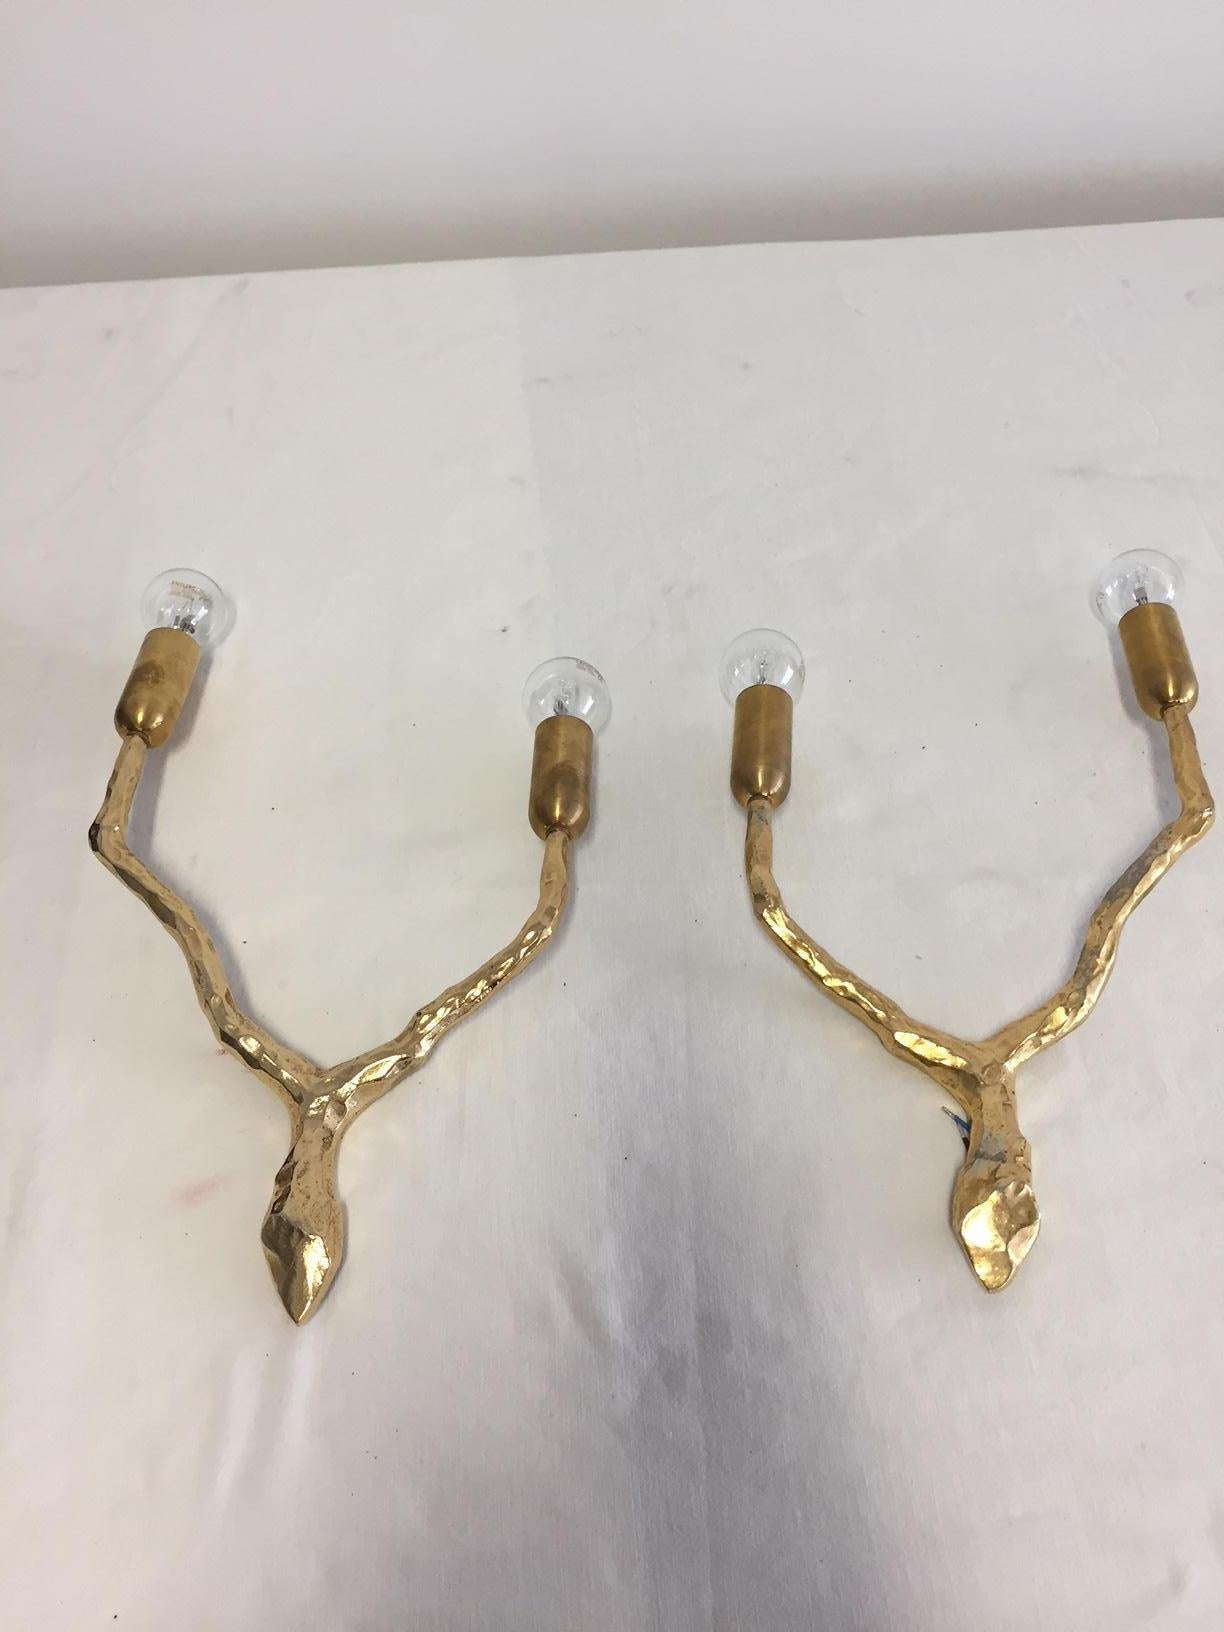 Bronze French Art Decorative Wall Sconces Two Arms by Maison Arlus For Sale